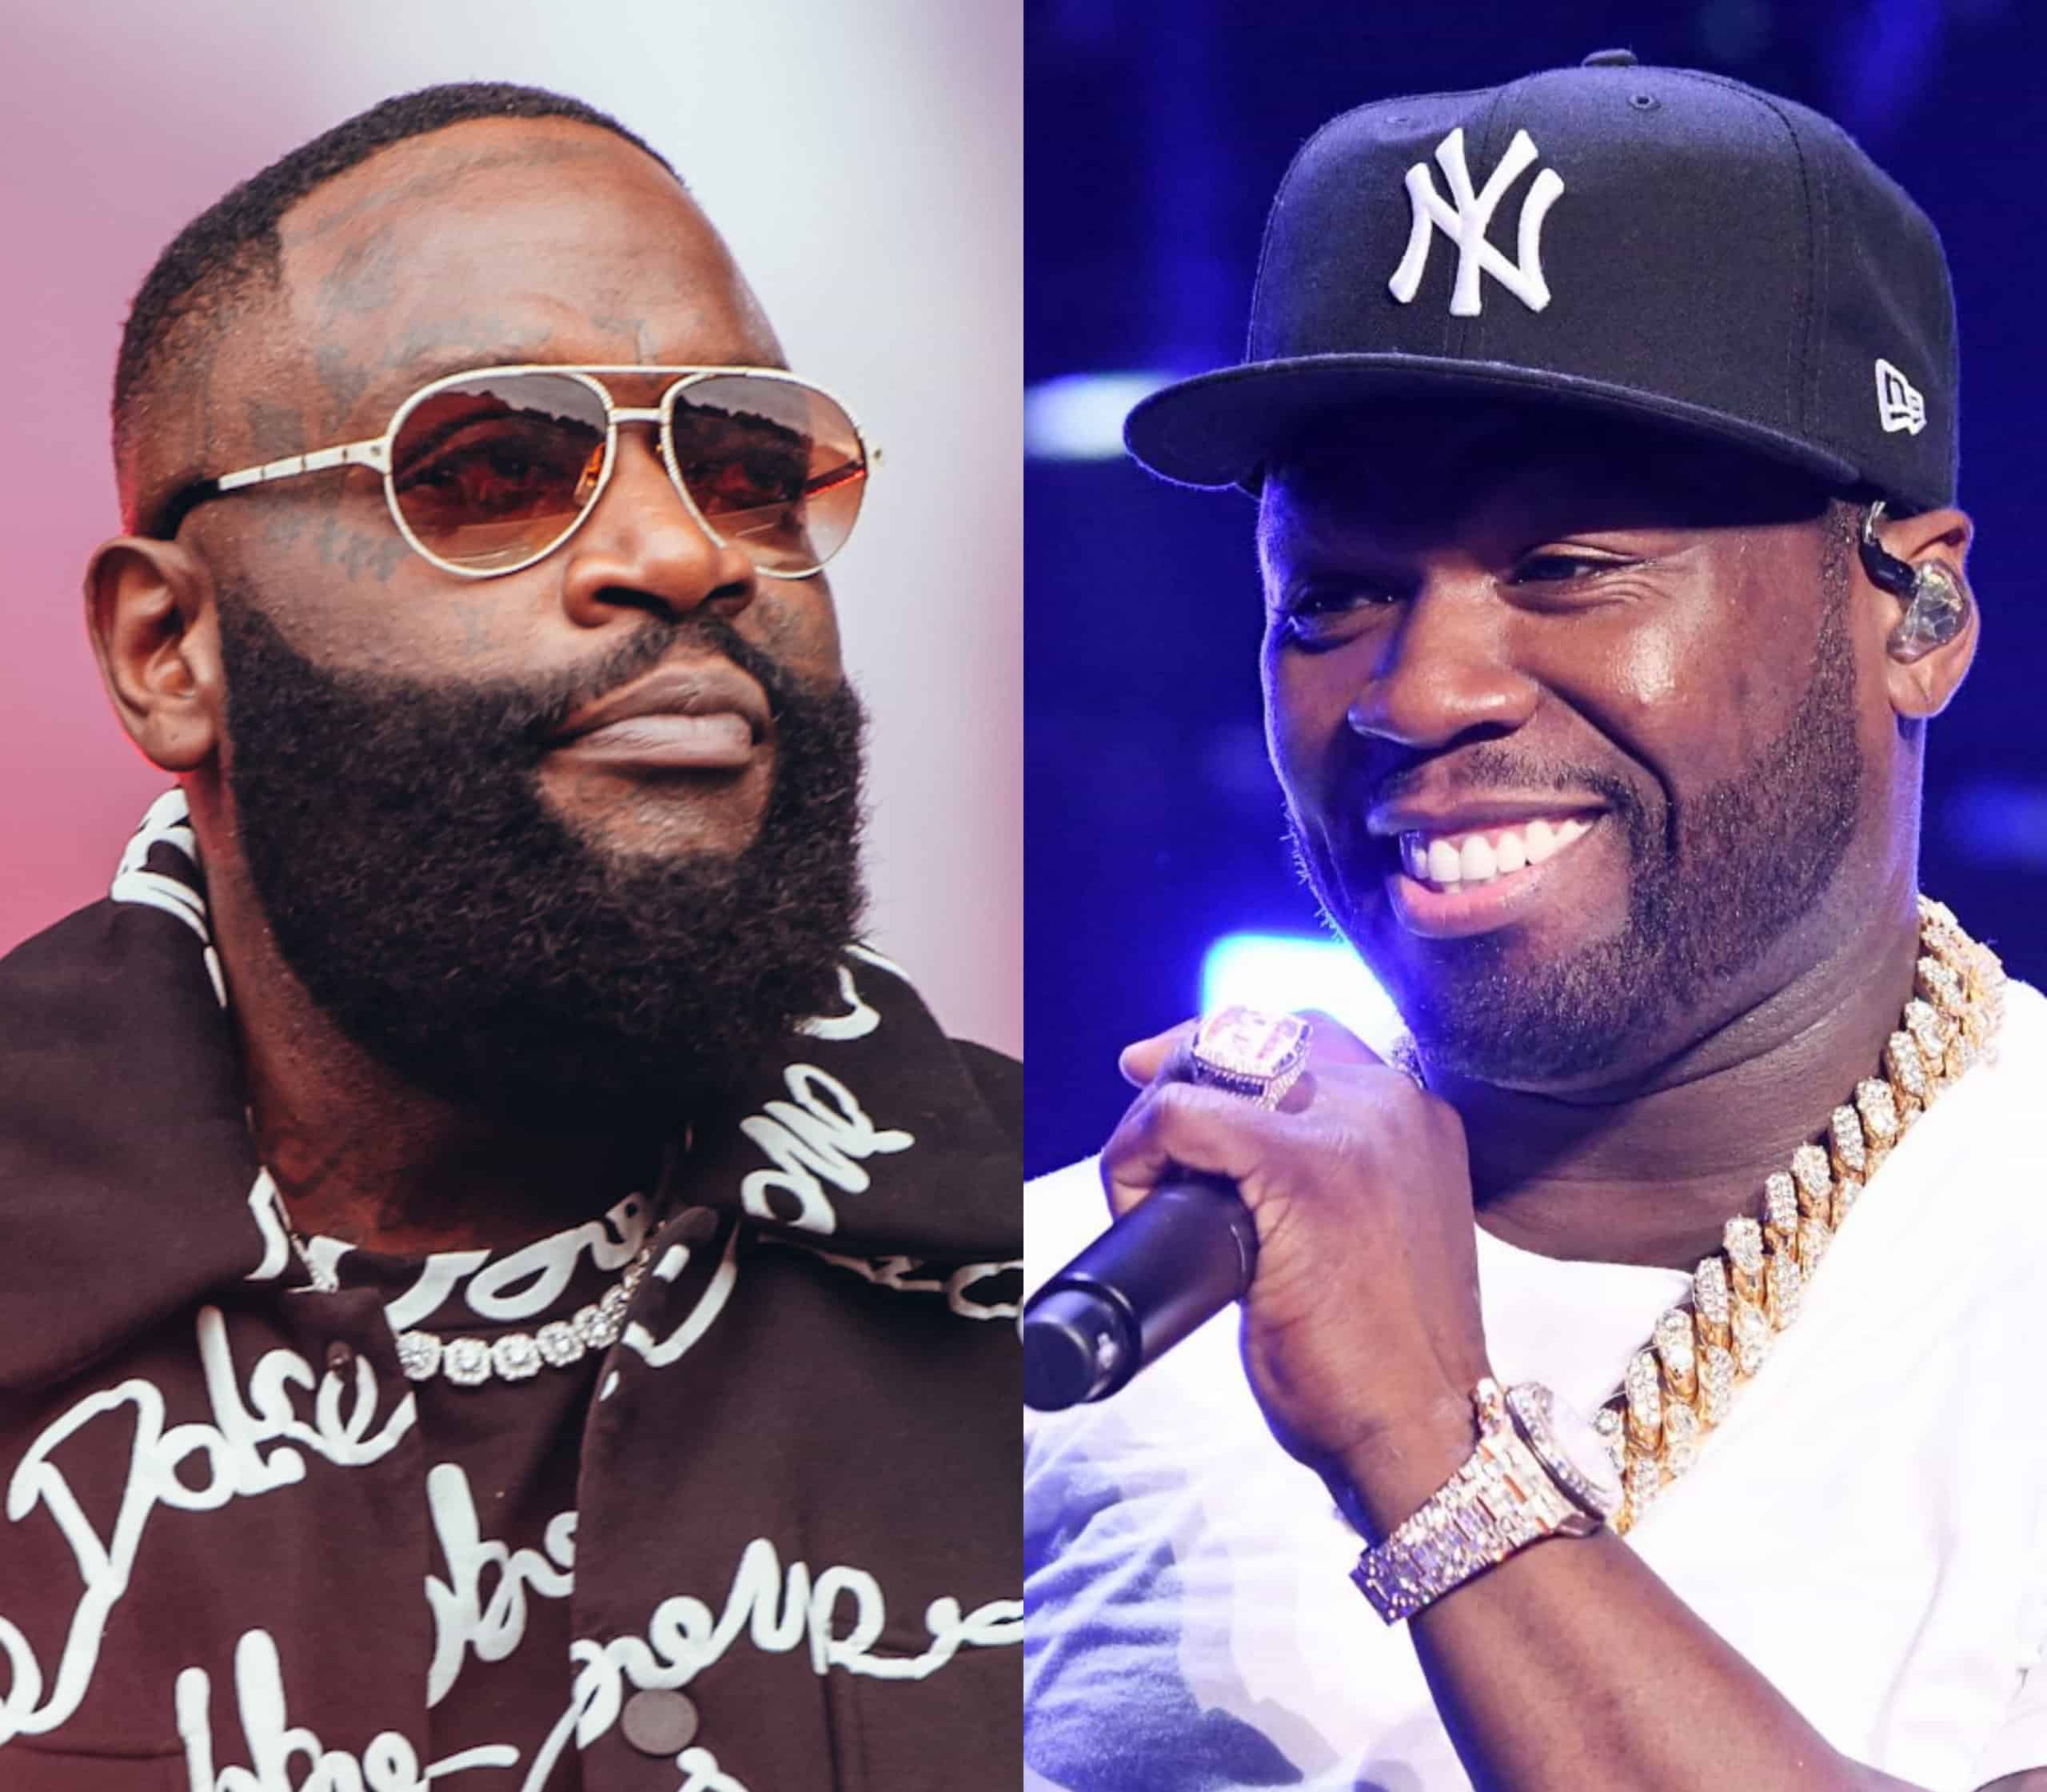 Rick Ross Reveals 50 Cent's Earning From BMF, Gets Trolled For His Album's Sales